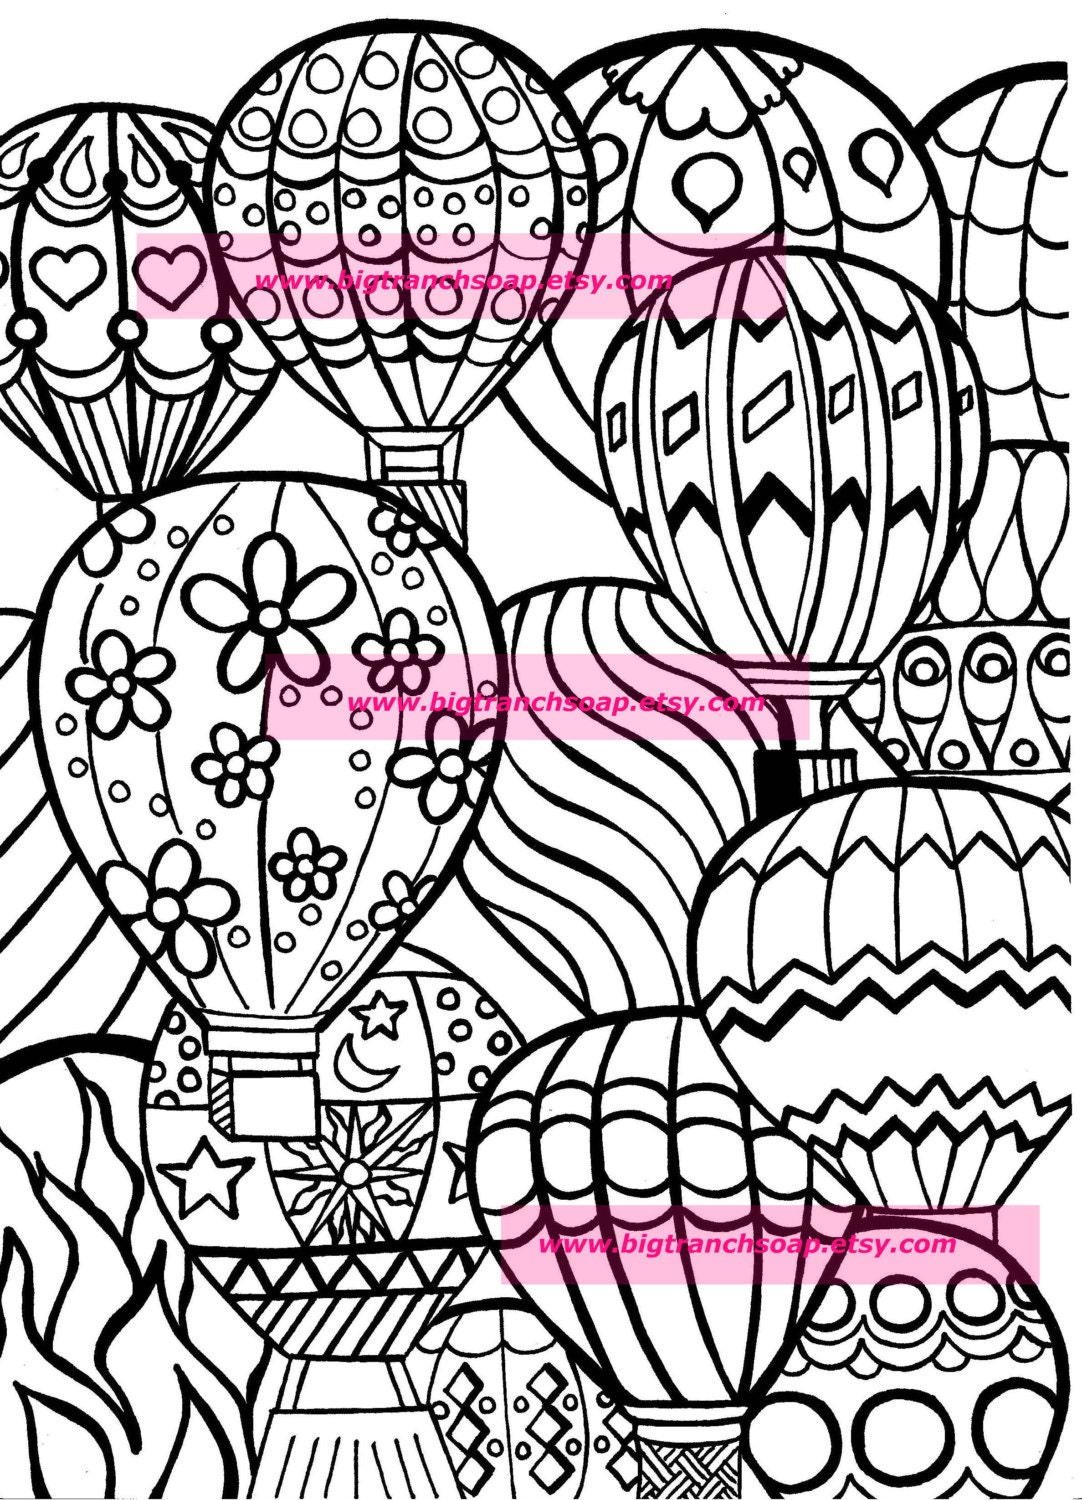 Download Coloring Page for Adults Hot Air Balloons Hand by BigTRanchSoap